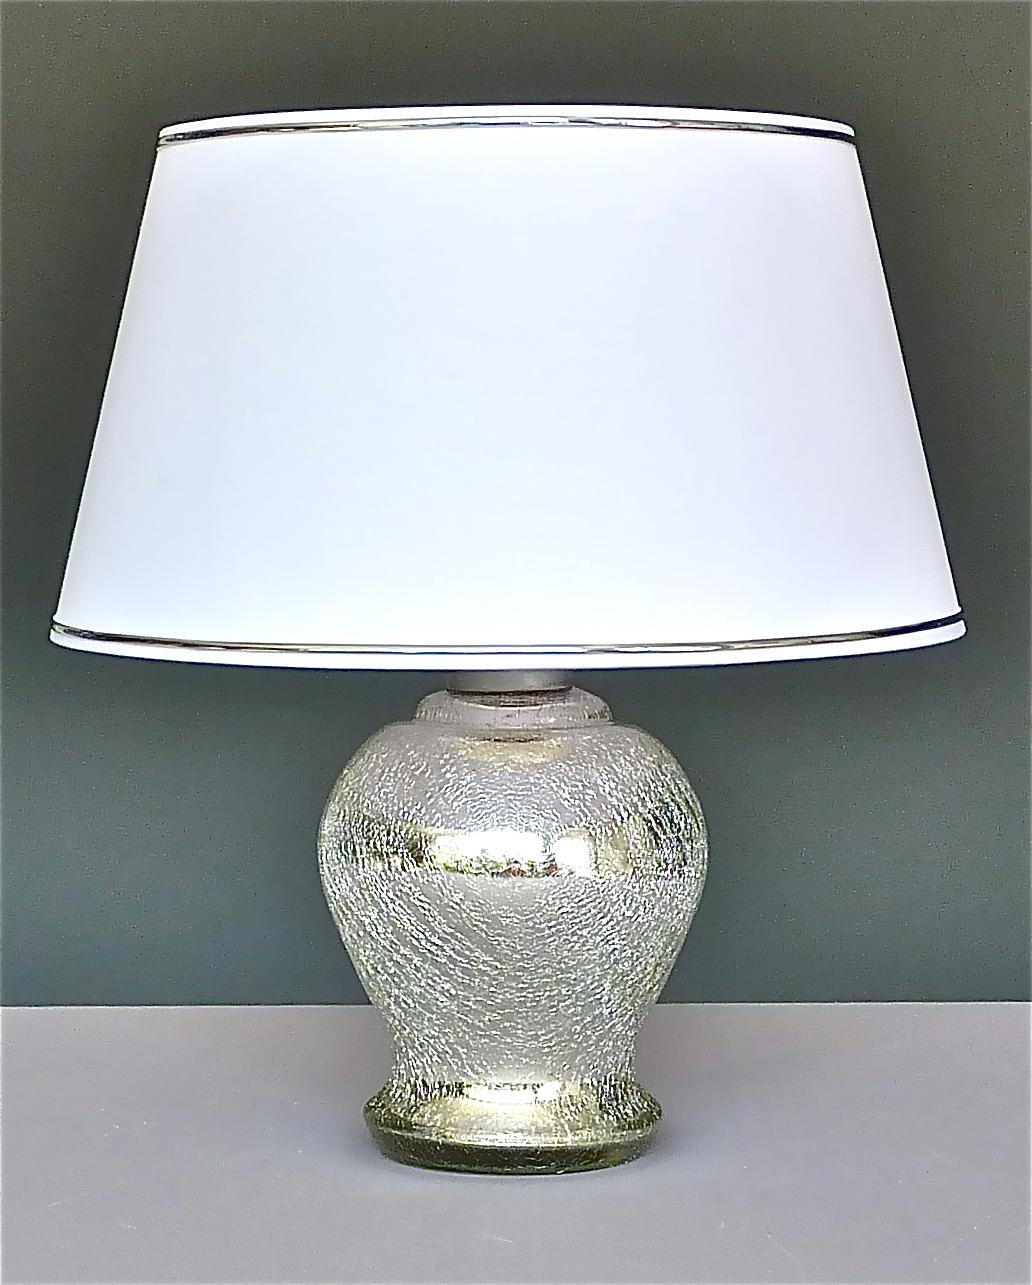 Rare Modernism Art Deco Table Lamp Silver Crackle Glass White Chrome France 1930 For Sale 5